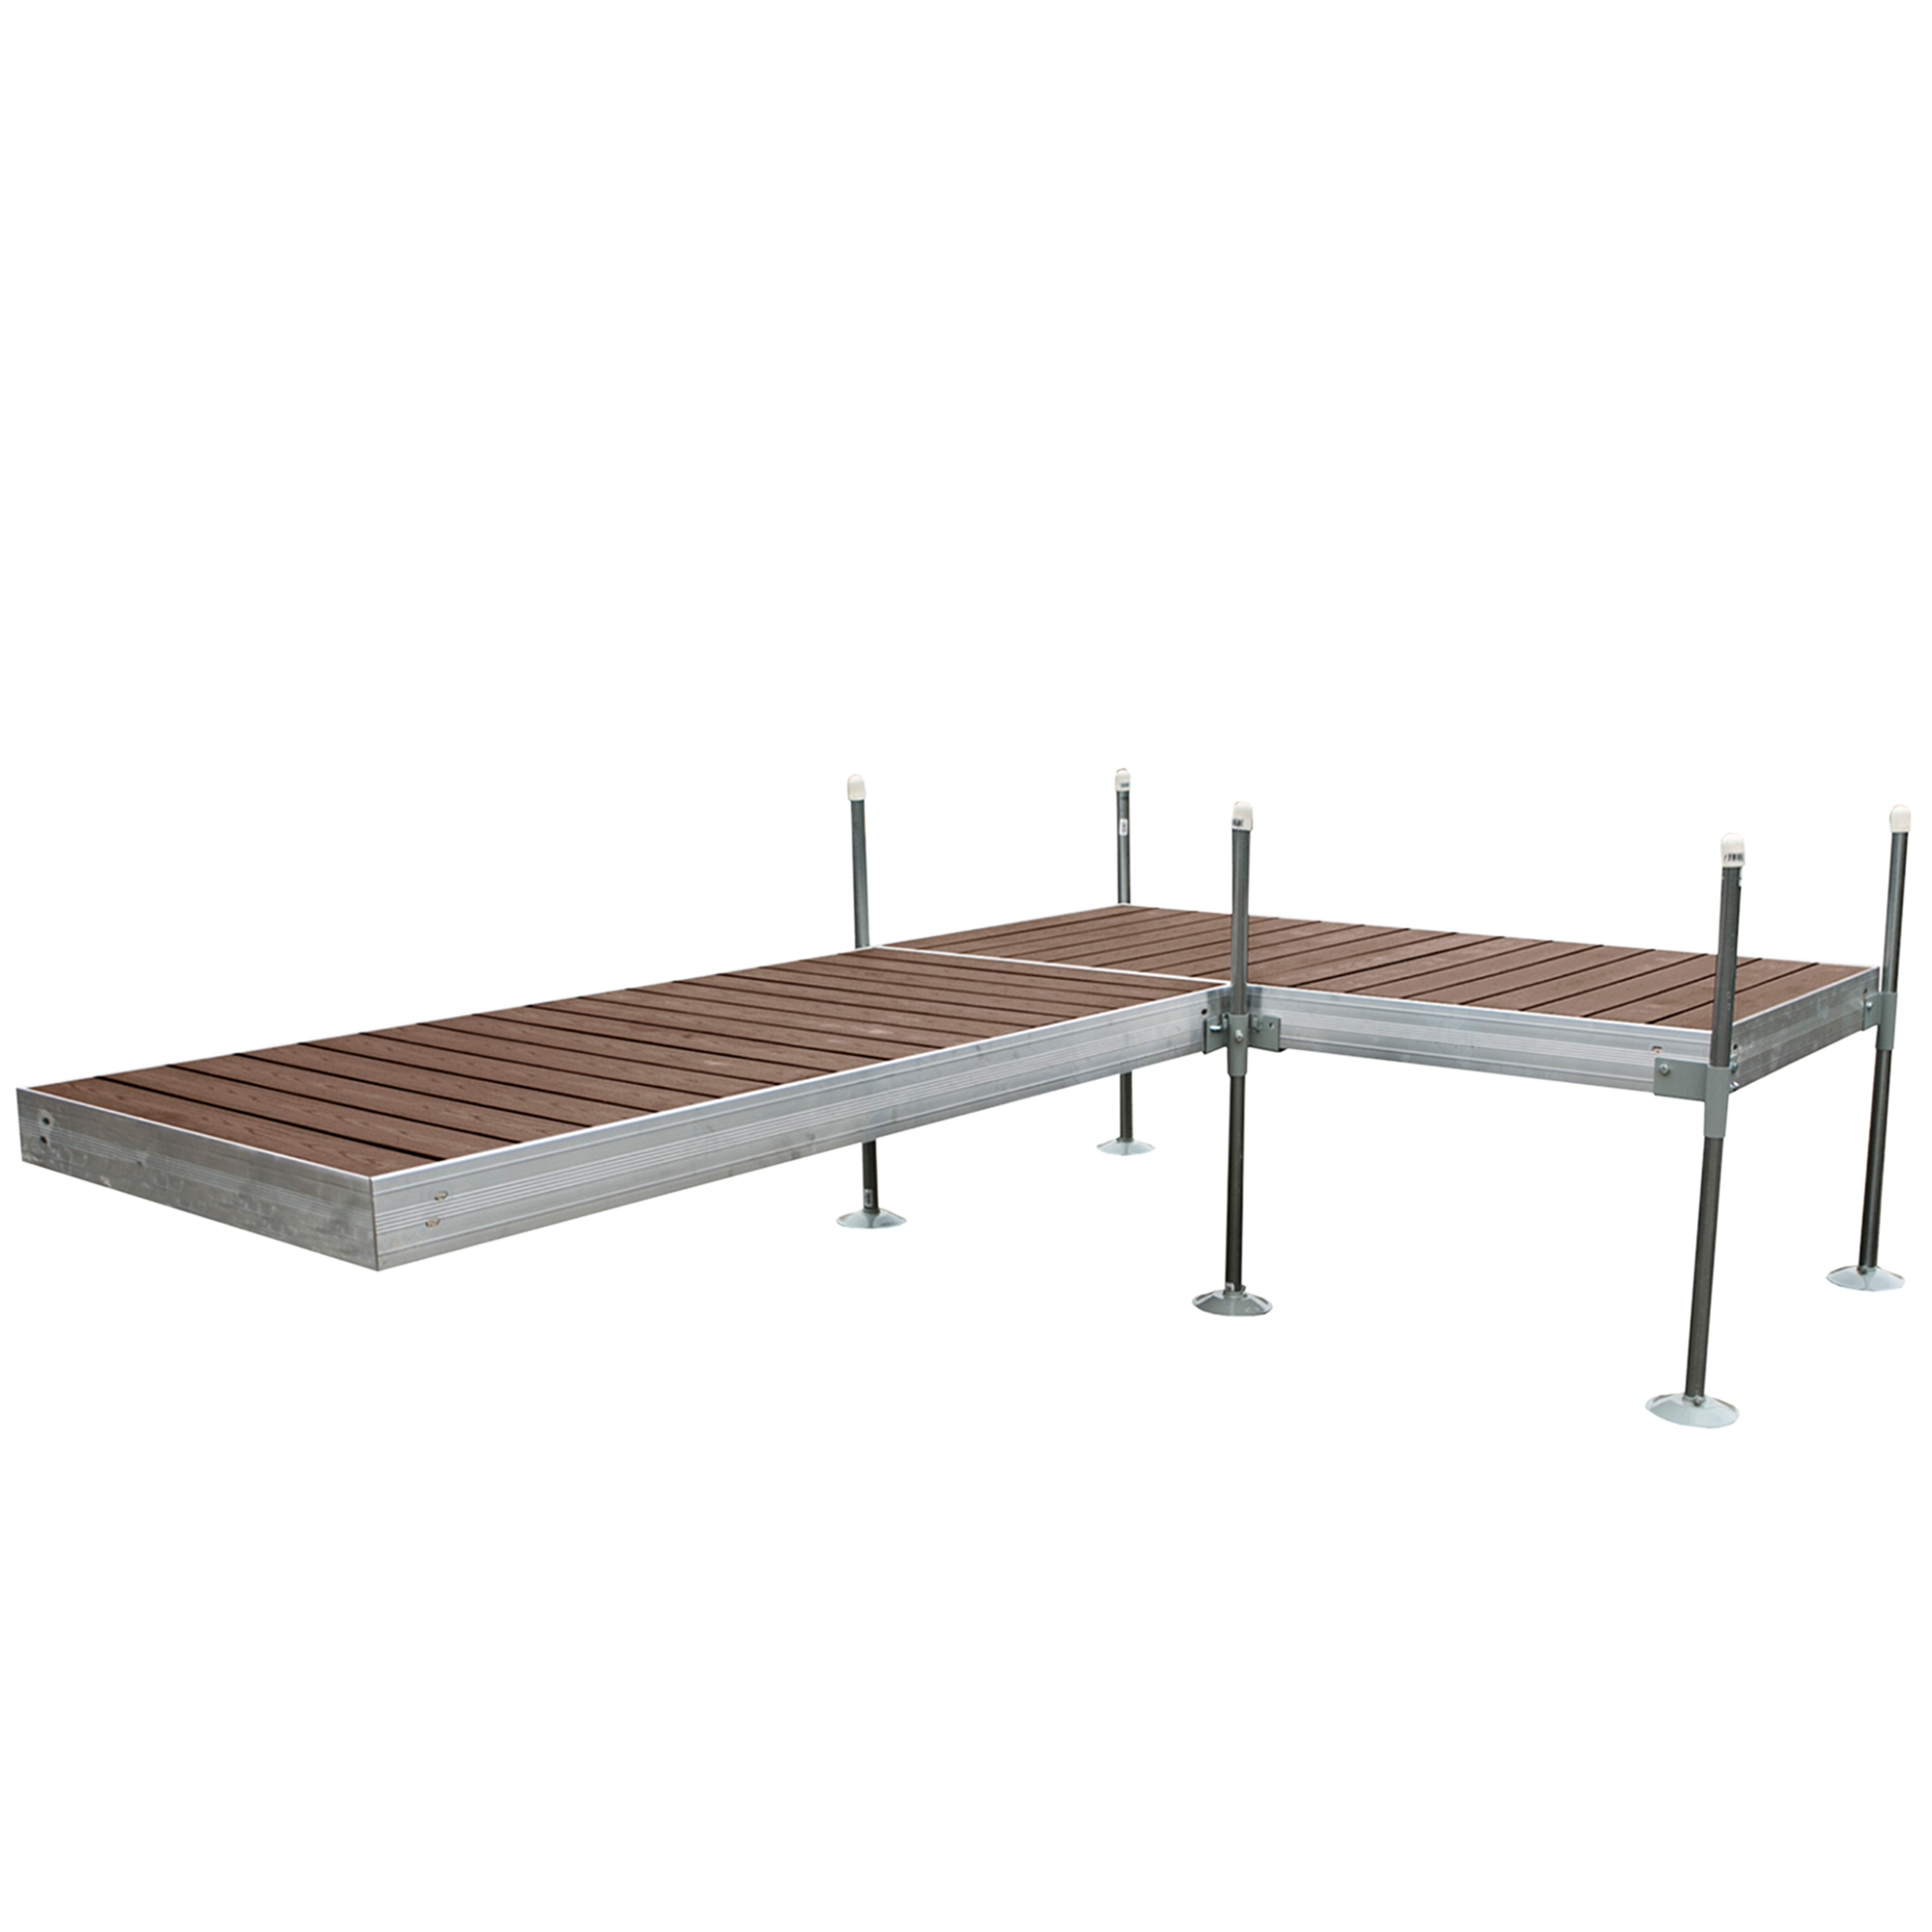 12' L-Shaped Boat Dock System with Aluminum Frame and Brown Composite Decking